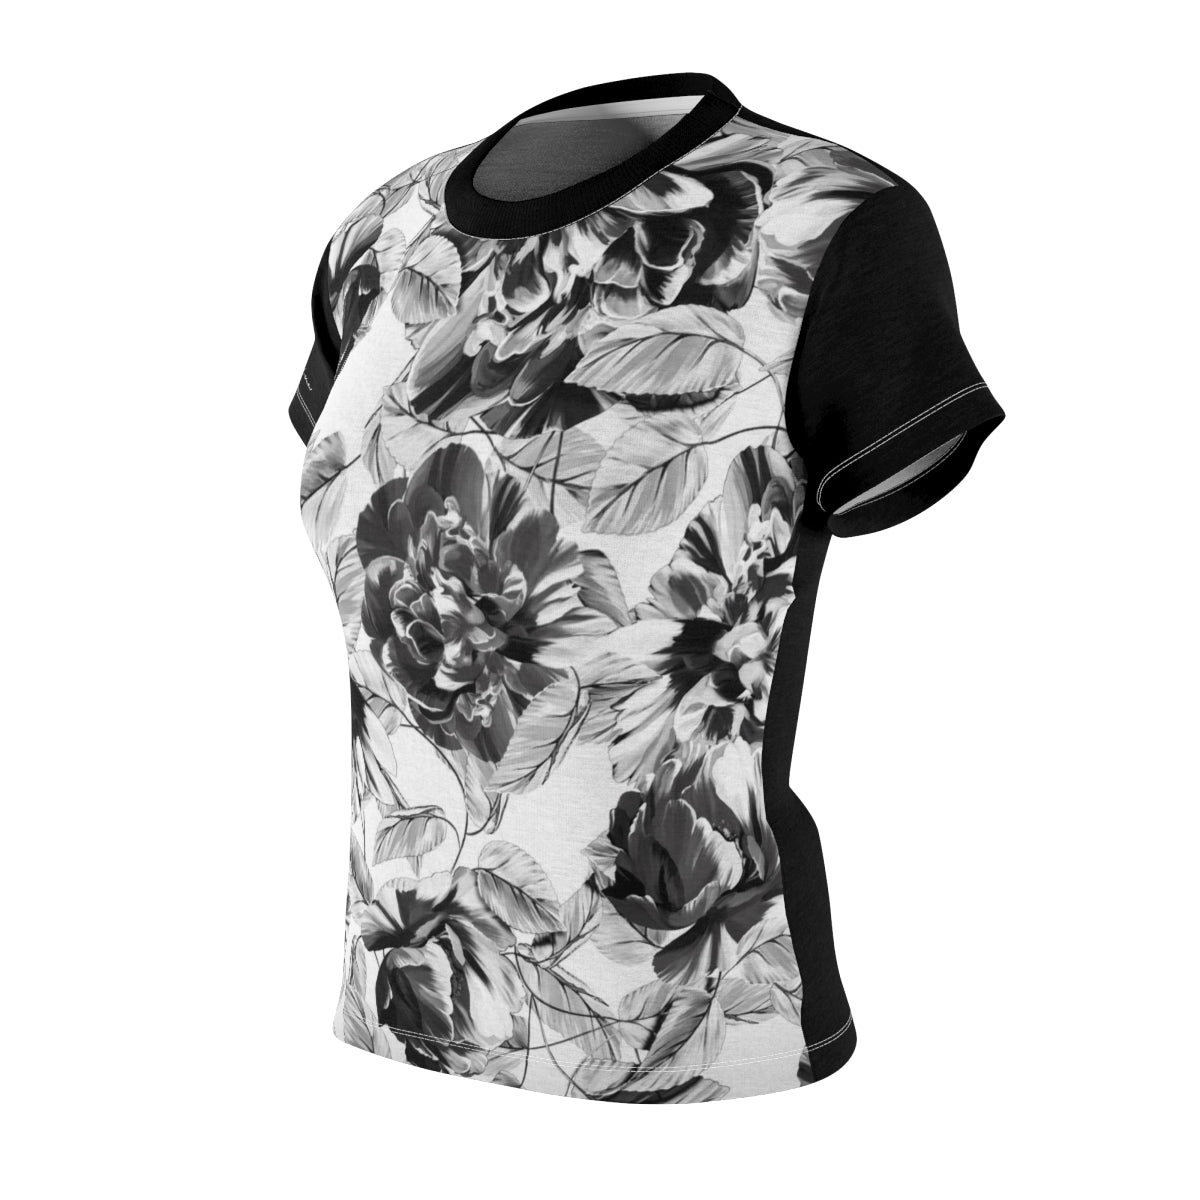 T-Shirt, Black-White Floral Look